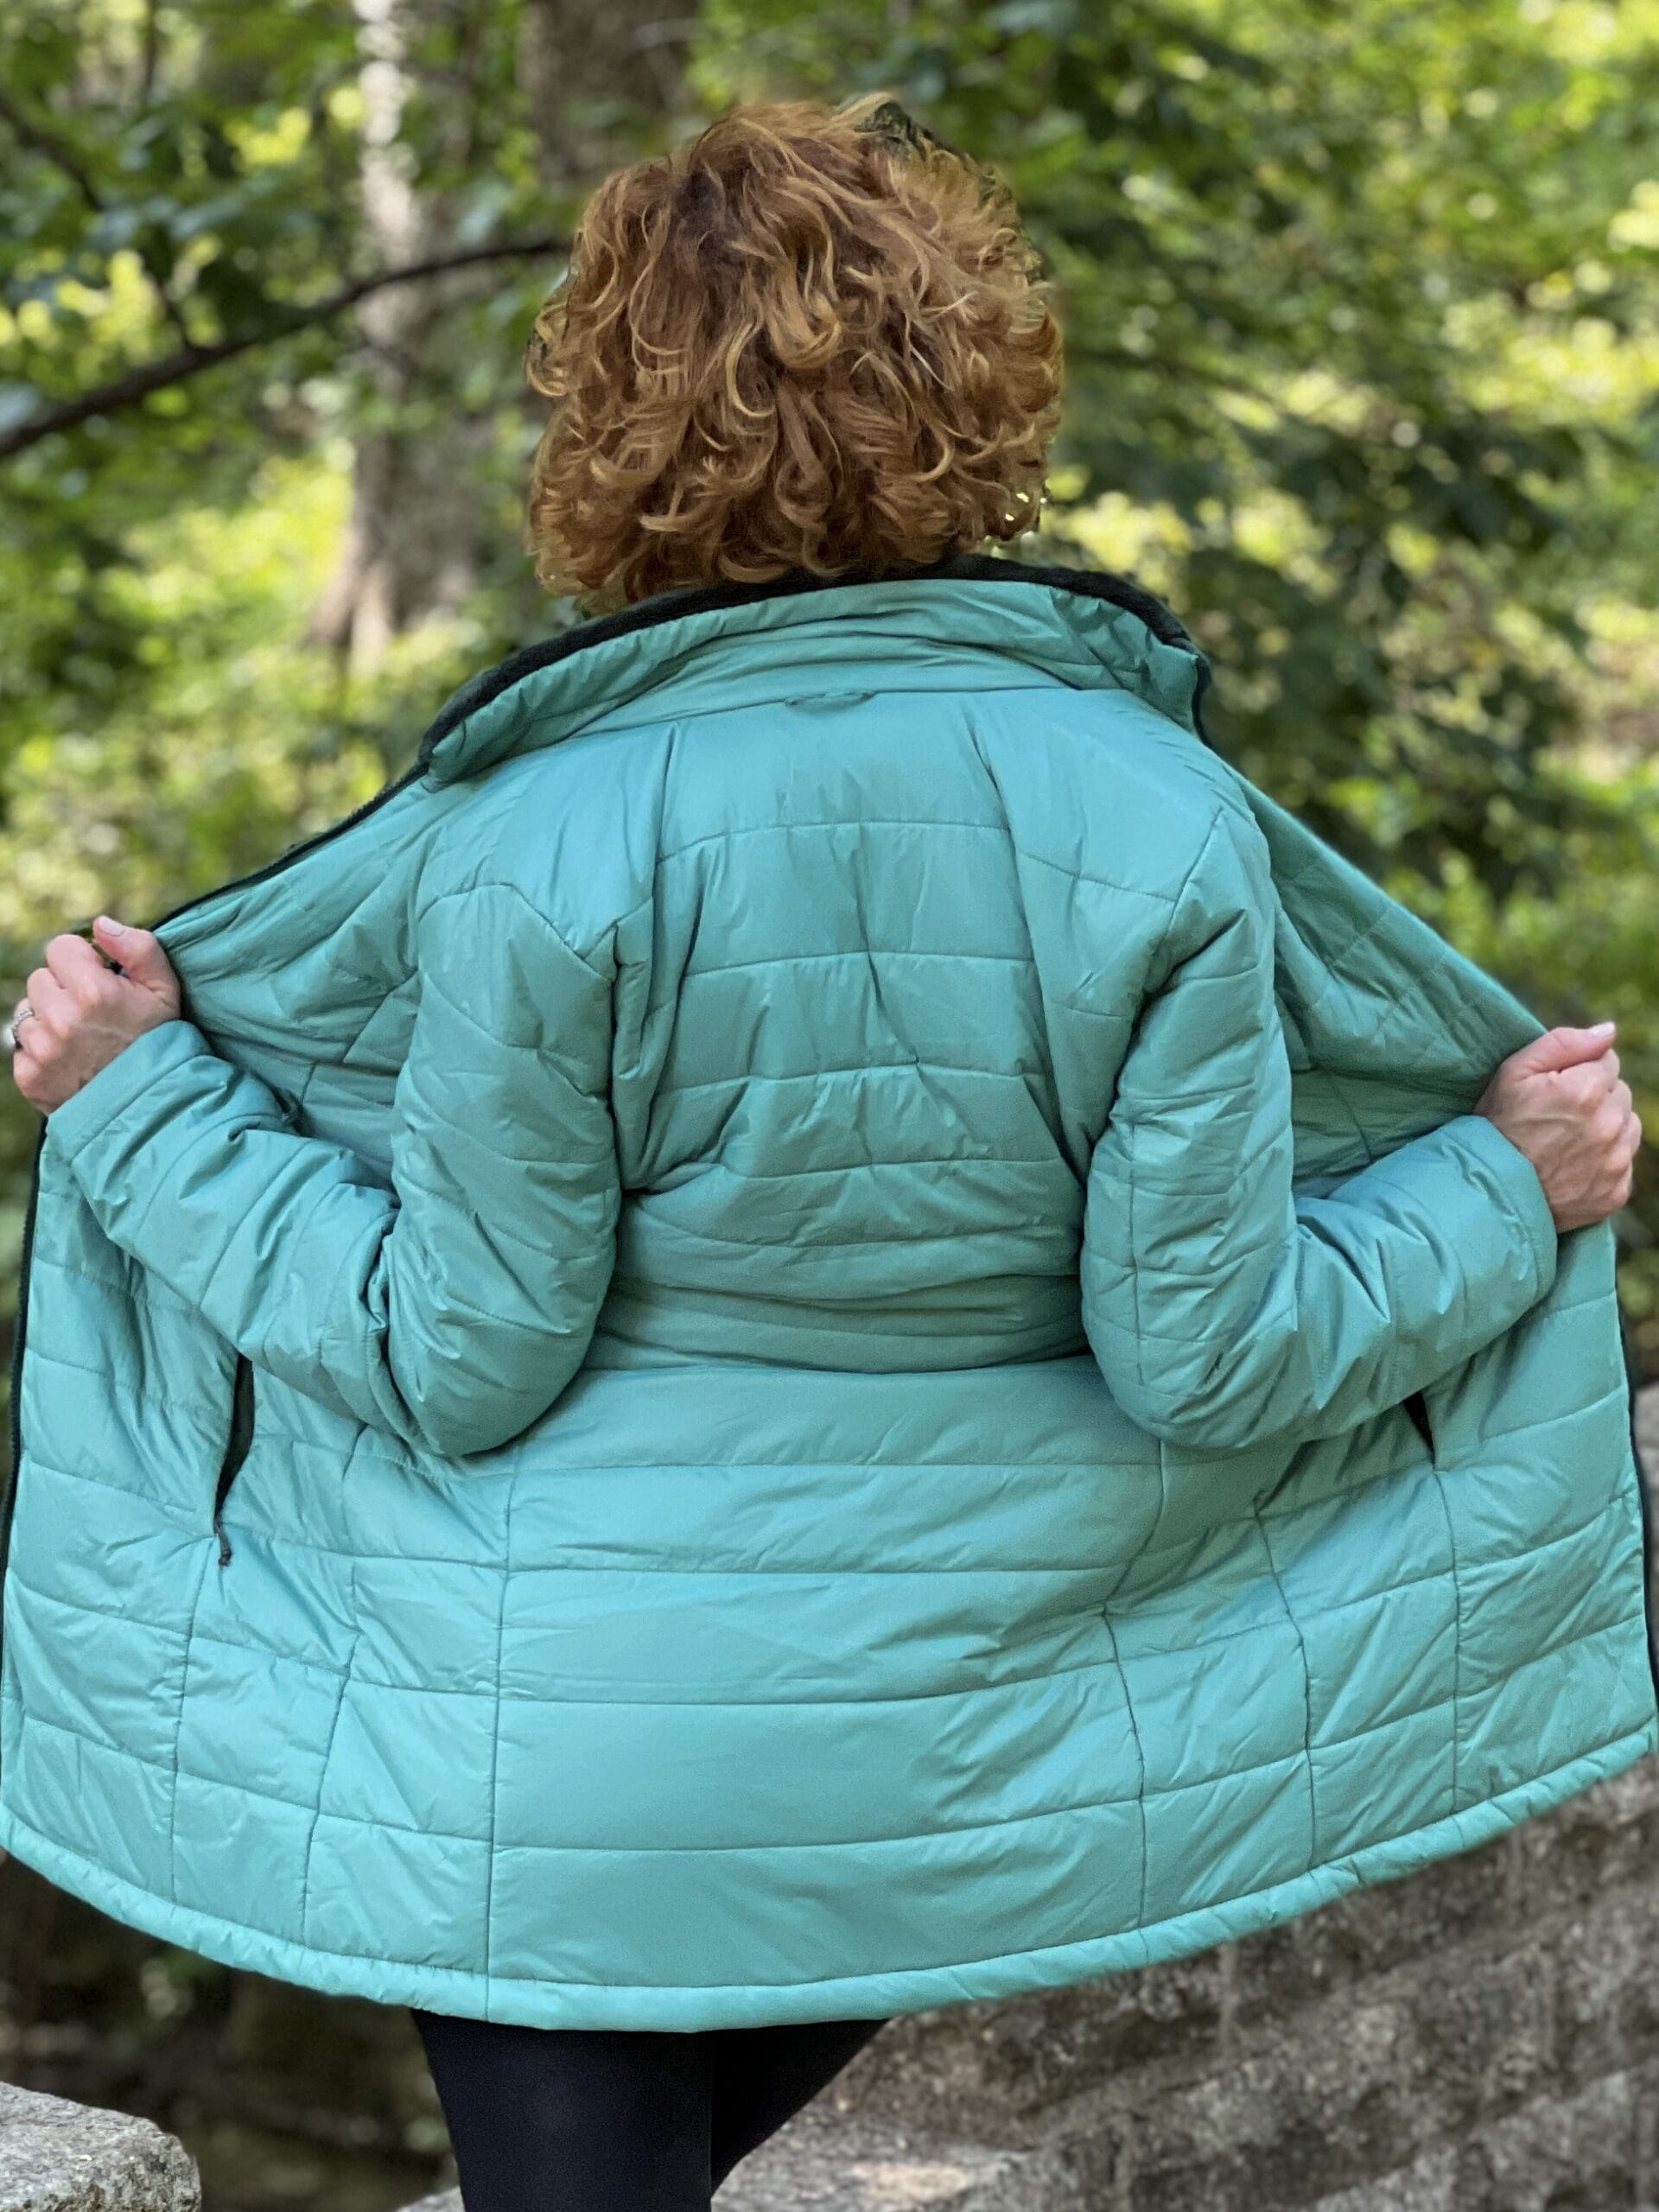 woman with brown curly hair holding open the green primaloft puffer jacket from the back